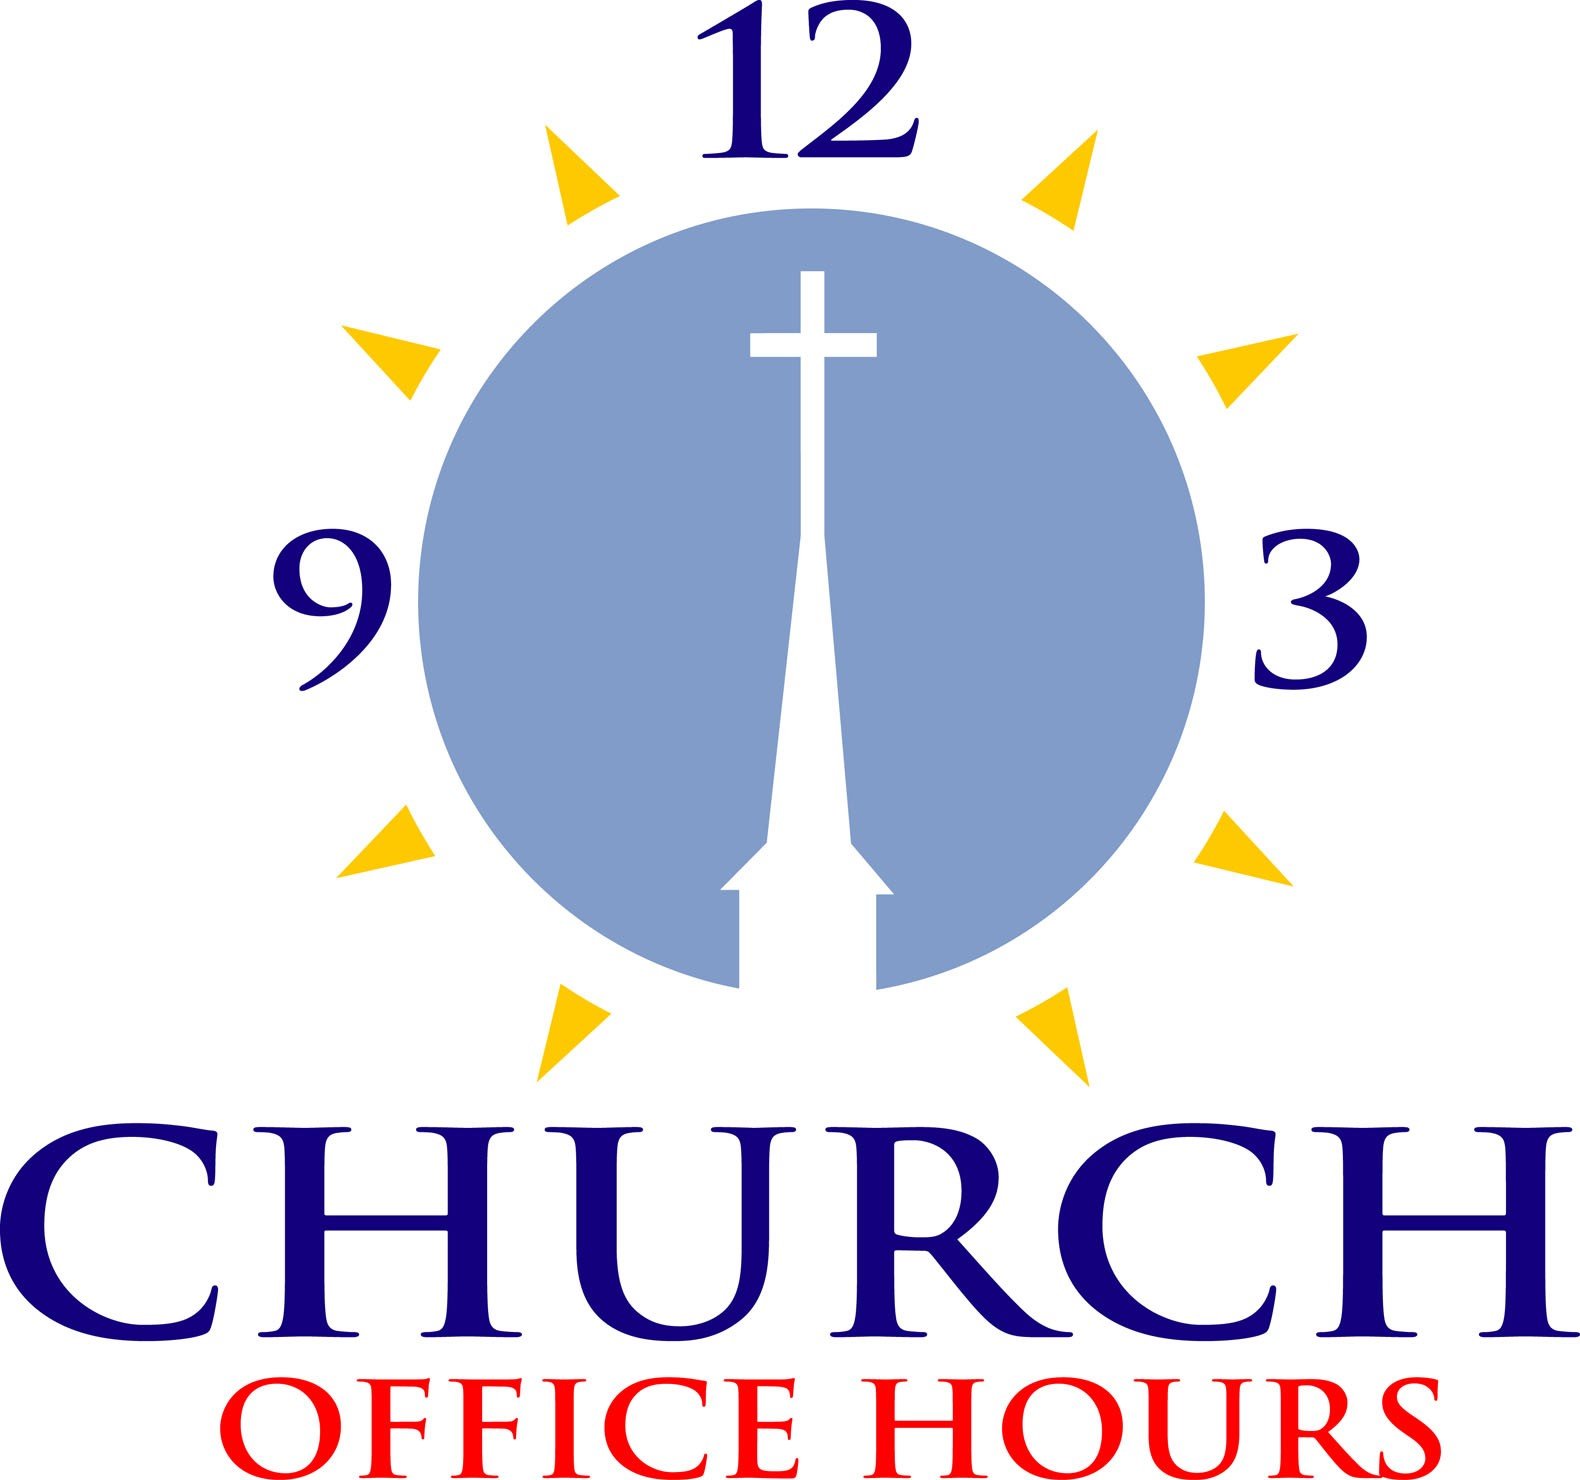 An image that is used for office hours